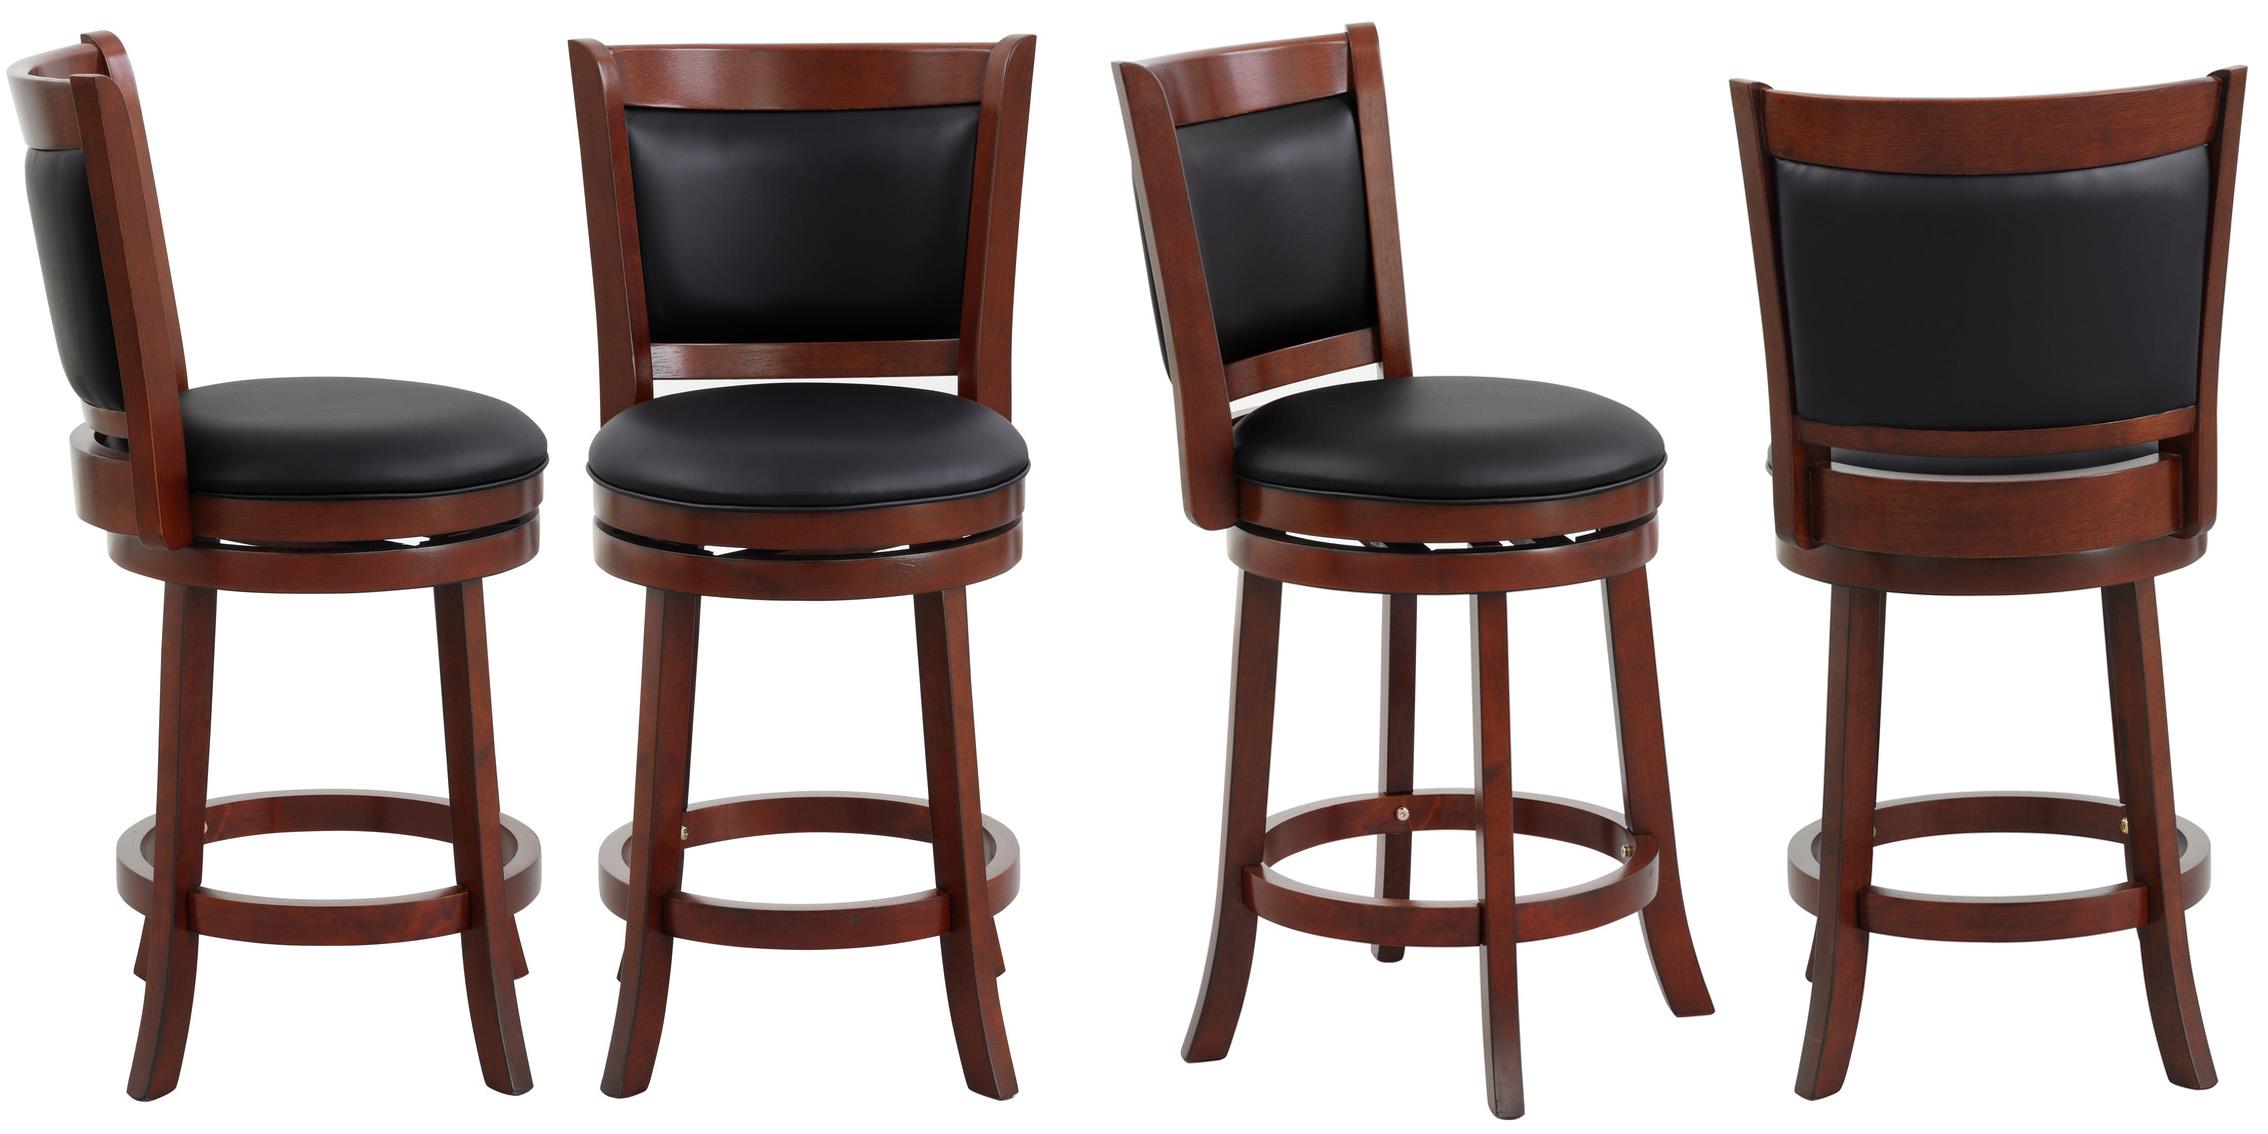 Traditional, Casual Dining Chair Set SHAPEL 1131-24S-Set-4 in Dark Cherry Faux Leather